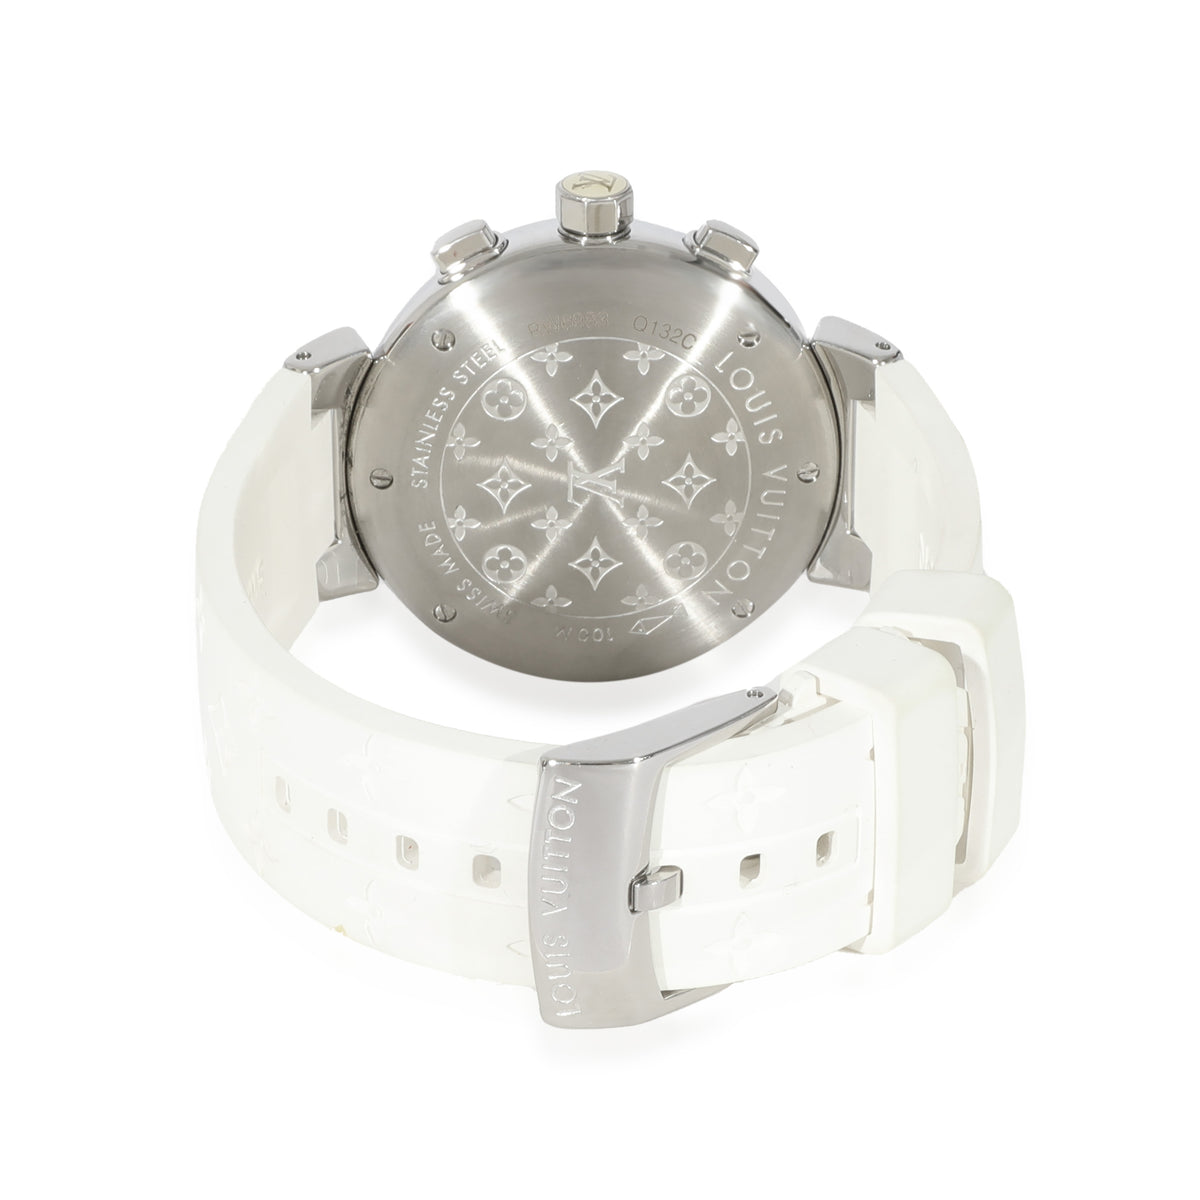 Louis Vuitton - Authenticated Tambour Watch - Steel White for Women, Very Good Condition